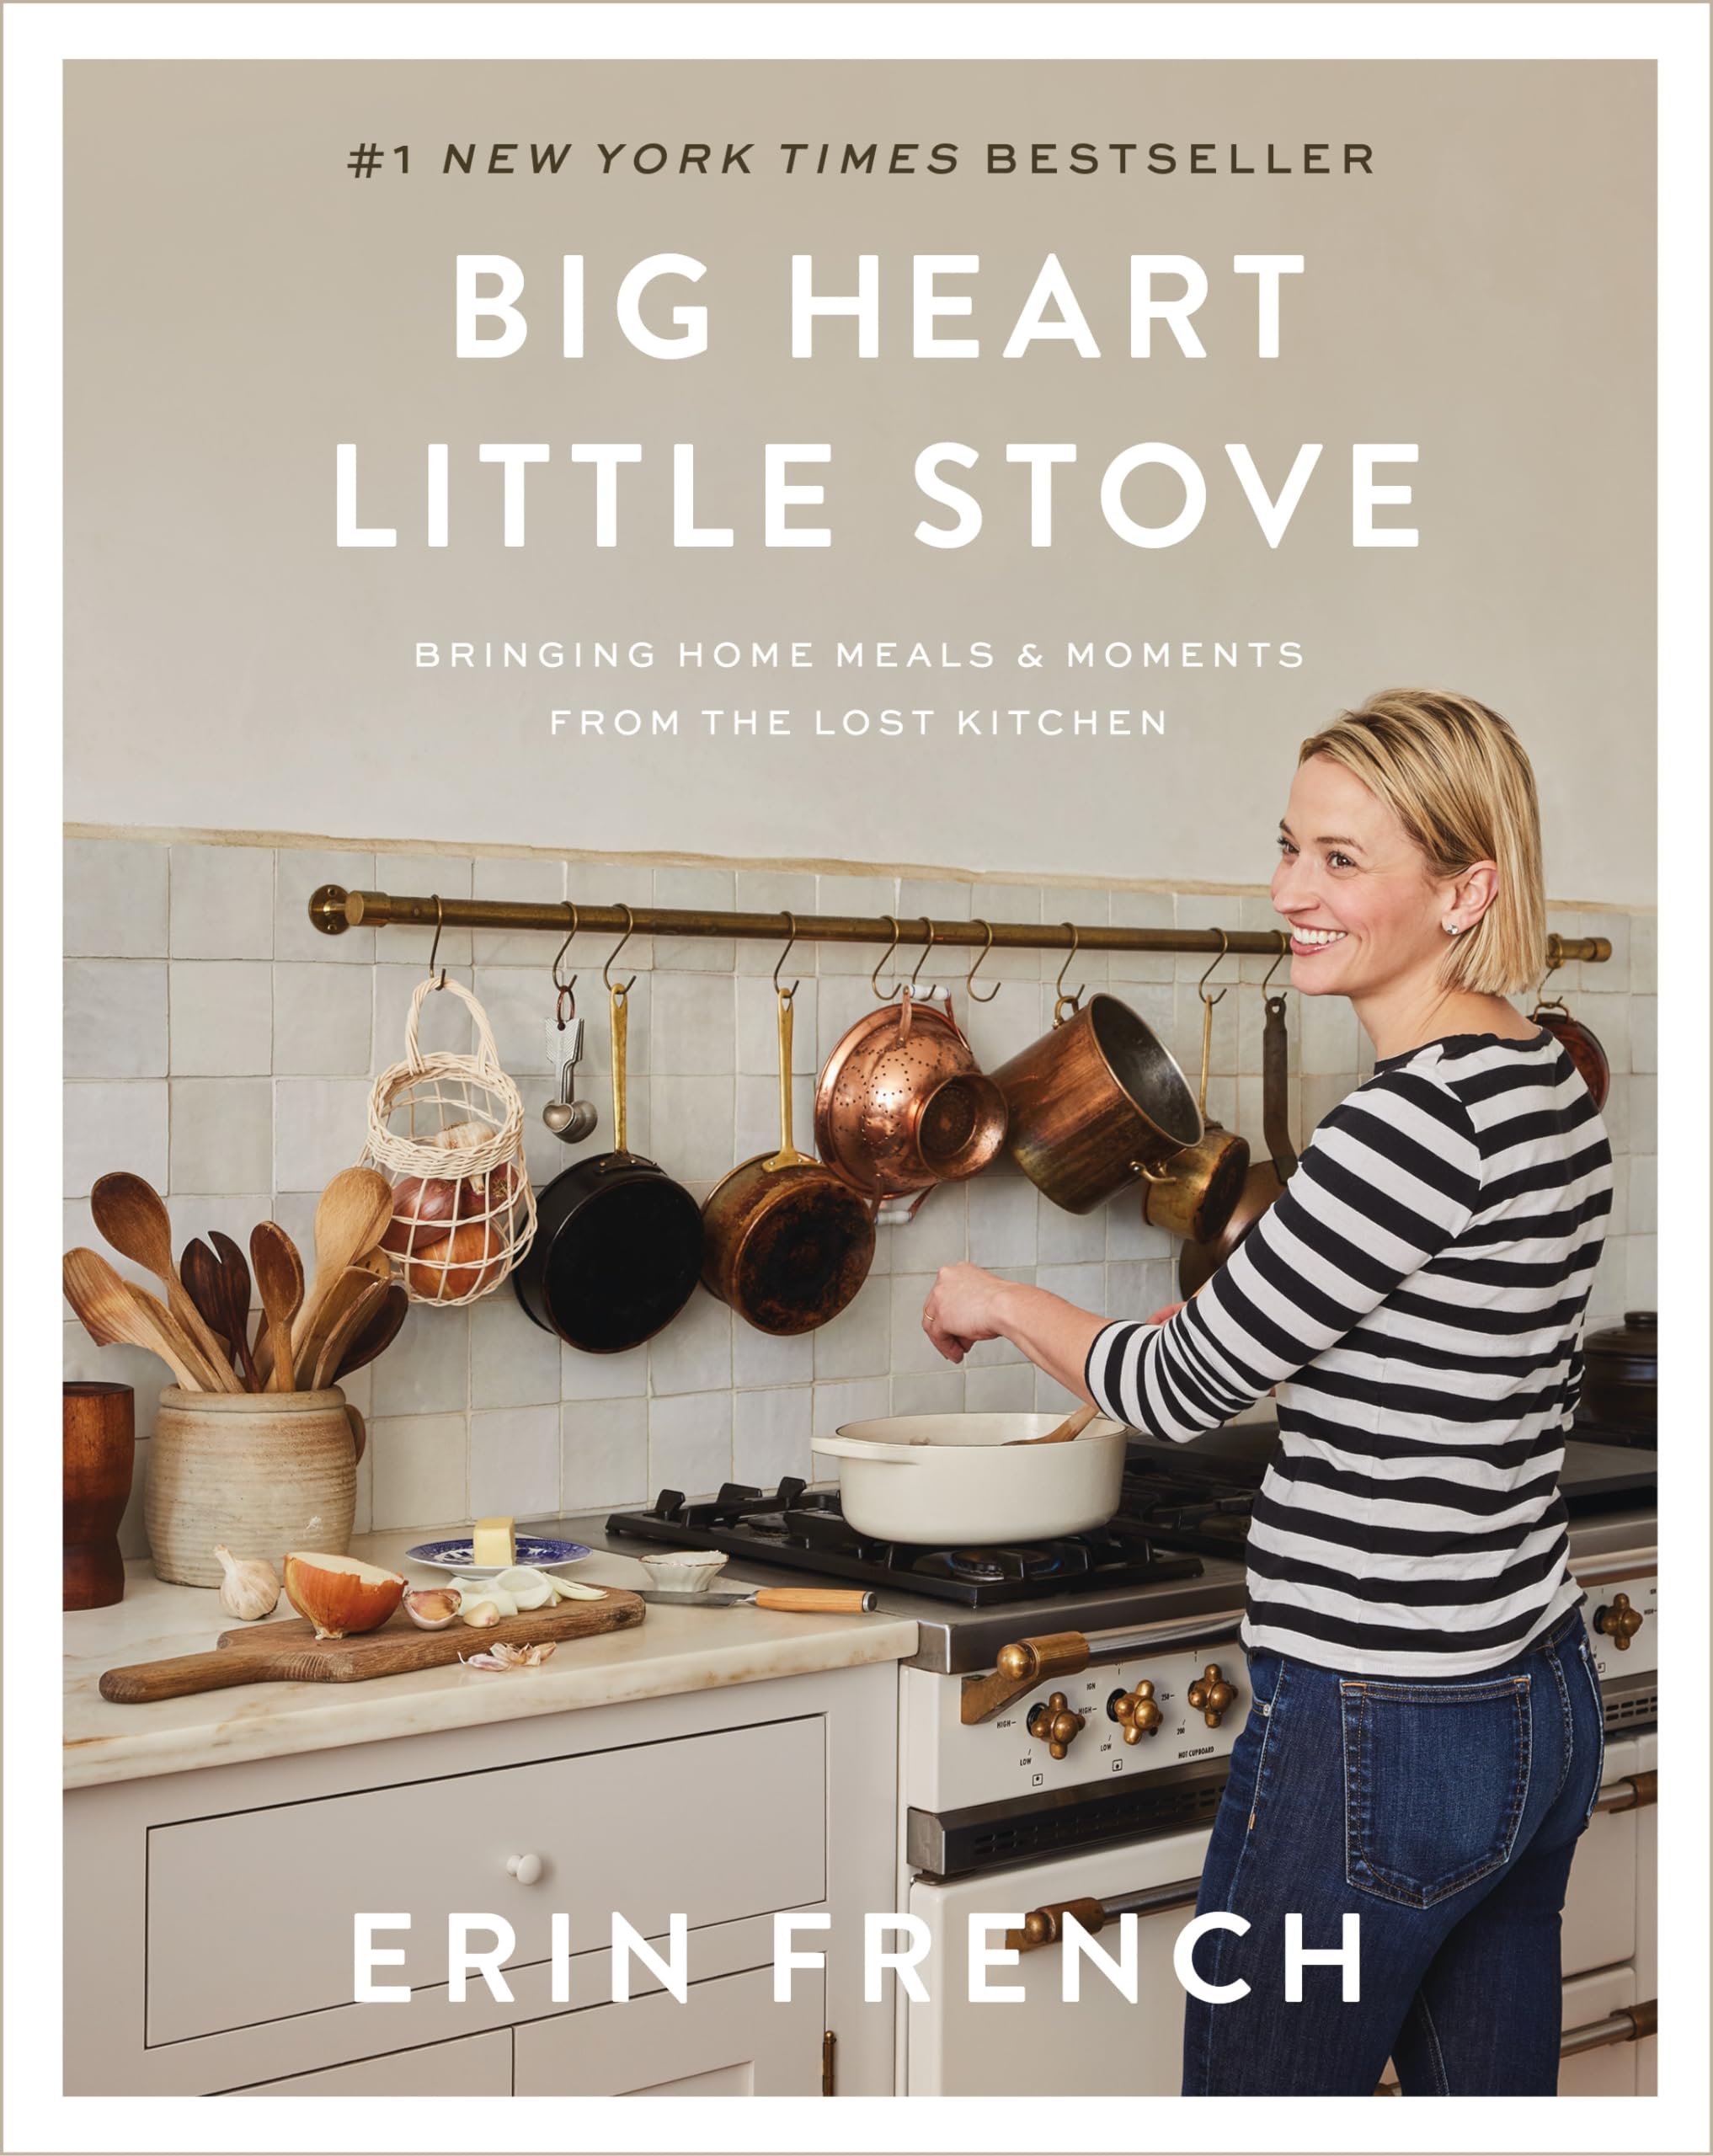 Big Heart Little Stove: Bringing Home Meals & Moments from the Lost Kitchen by French, Erin